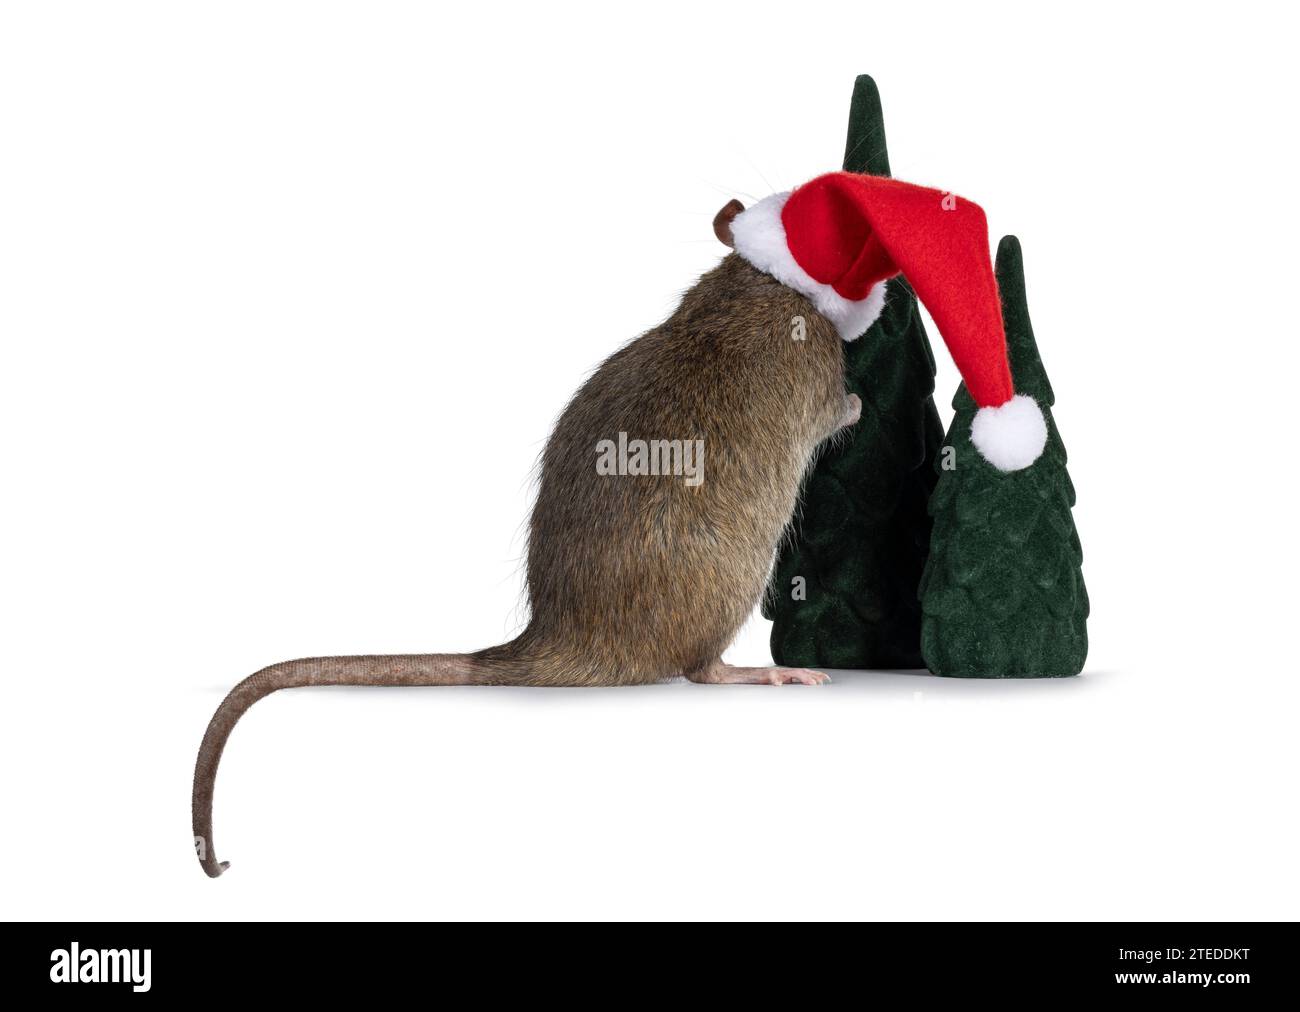 Cute tame rat, standing backwards up against fake trees wearing santa hat. Isolated on a white background. Stock Photo